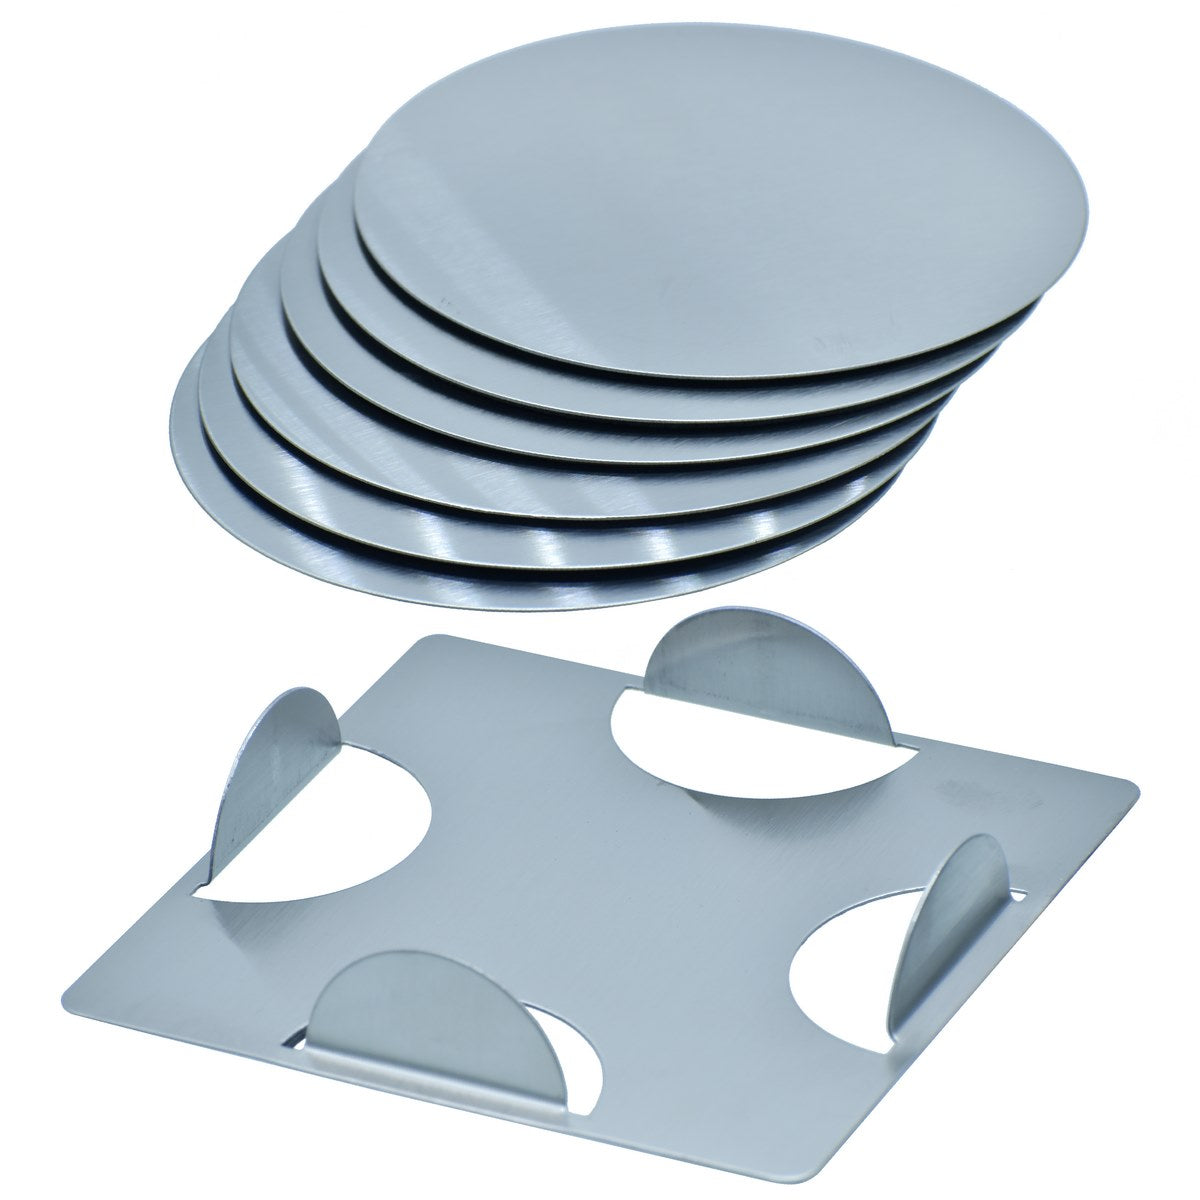 Set of 6 Steel Round Tea Coaster - For Corporate Gifting, Office Use, Personal Use, Return Gift